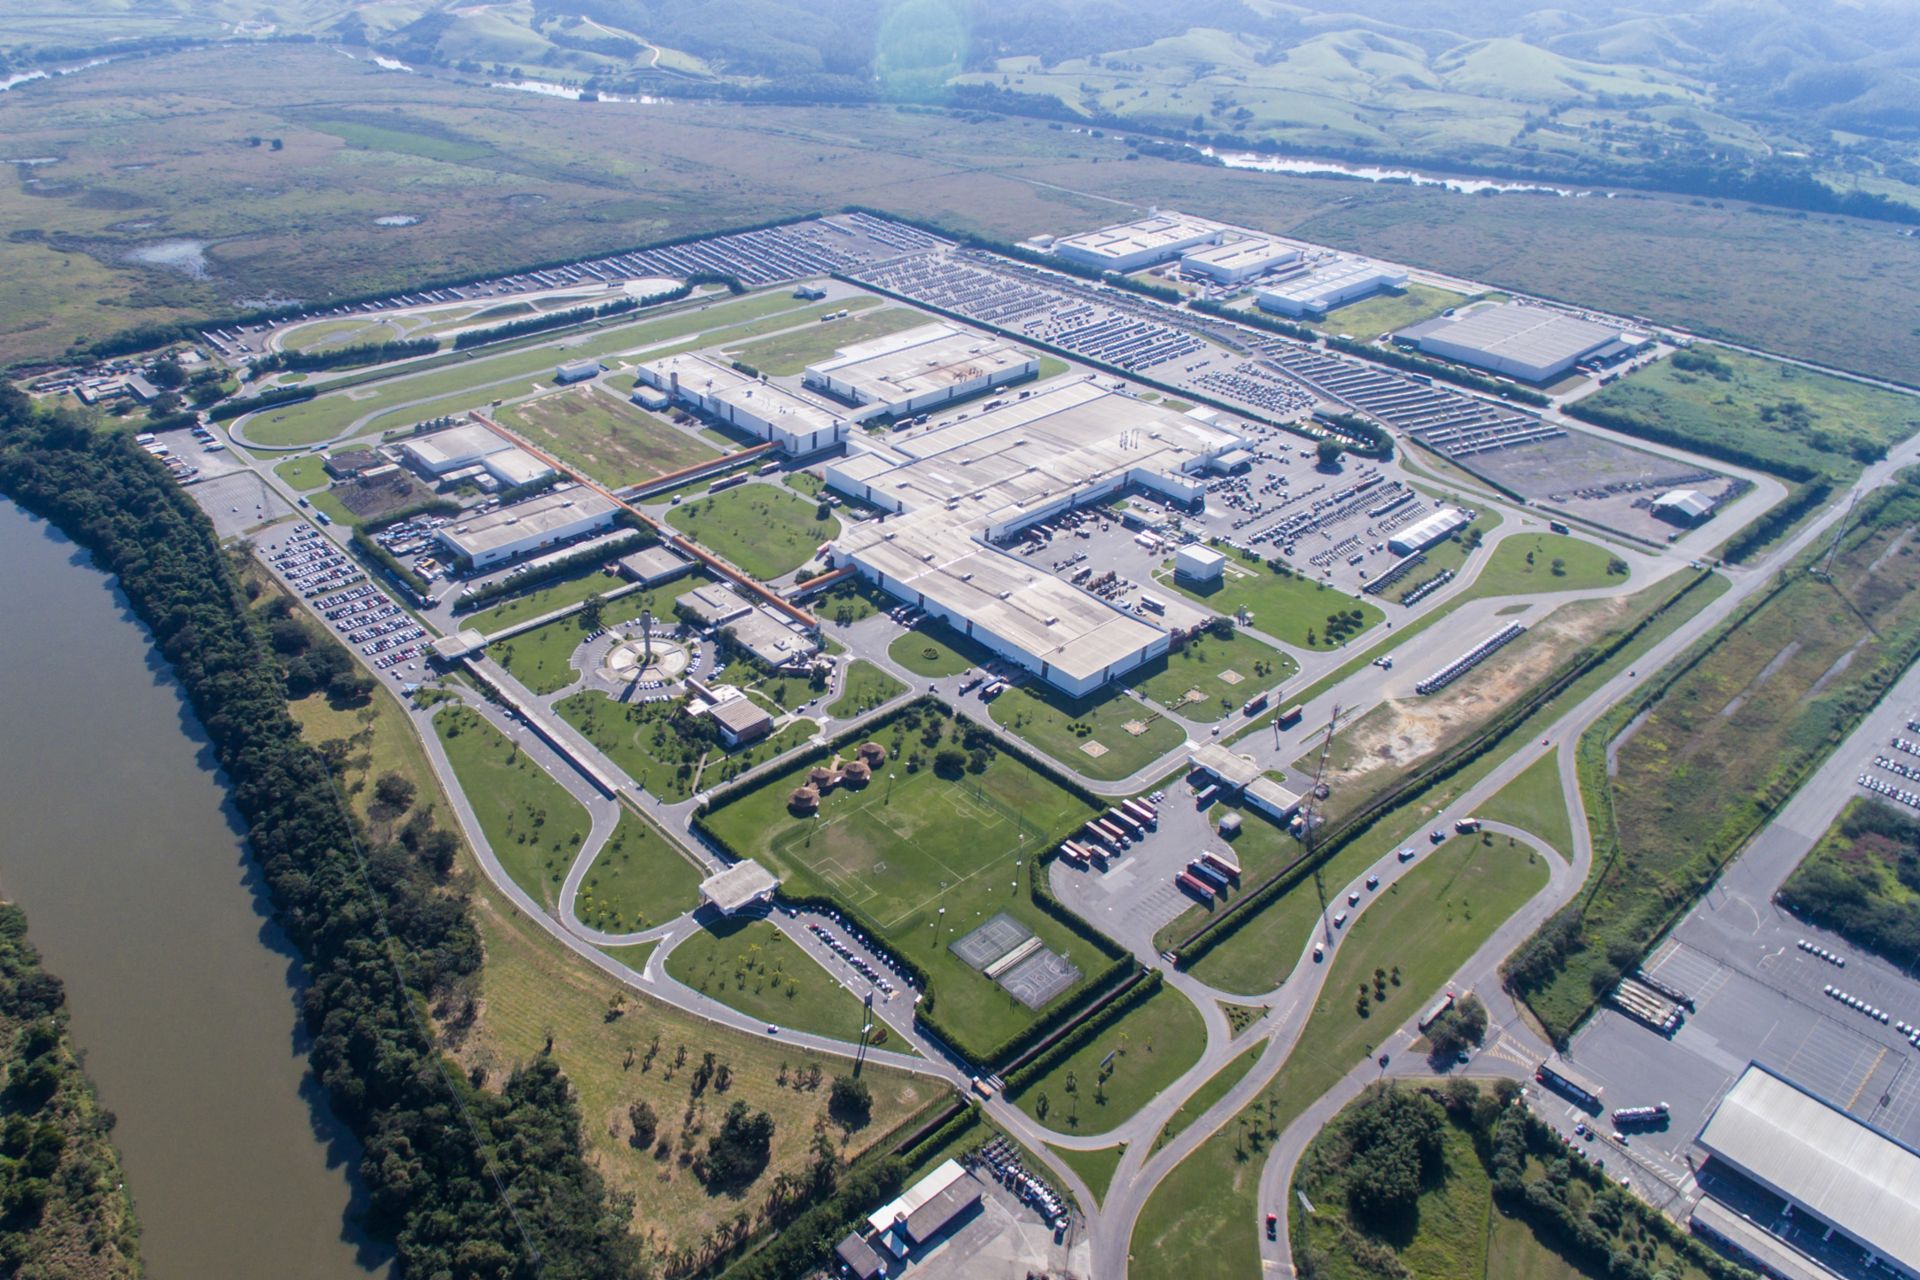 Image of the VWCO plant in Resende